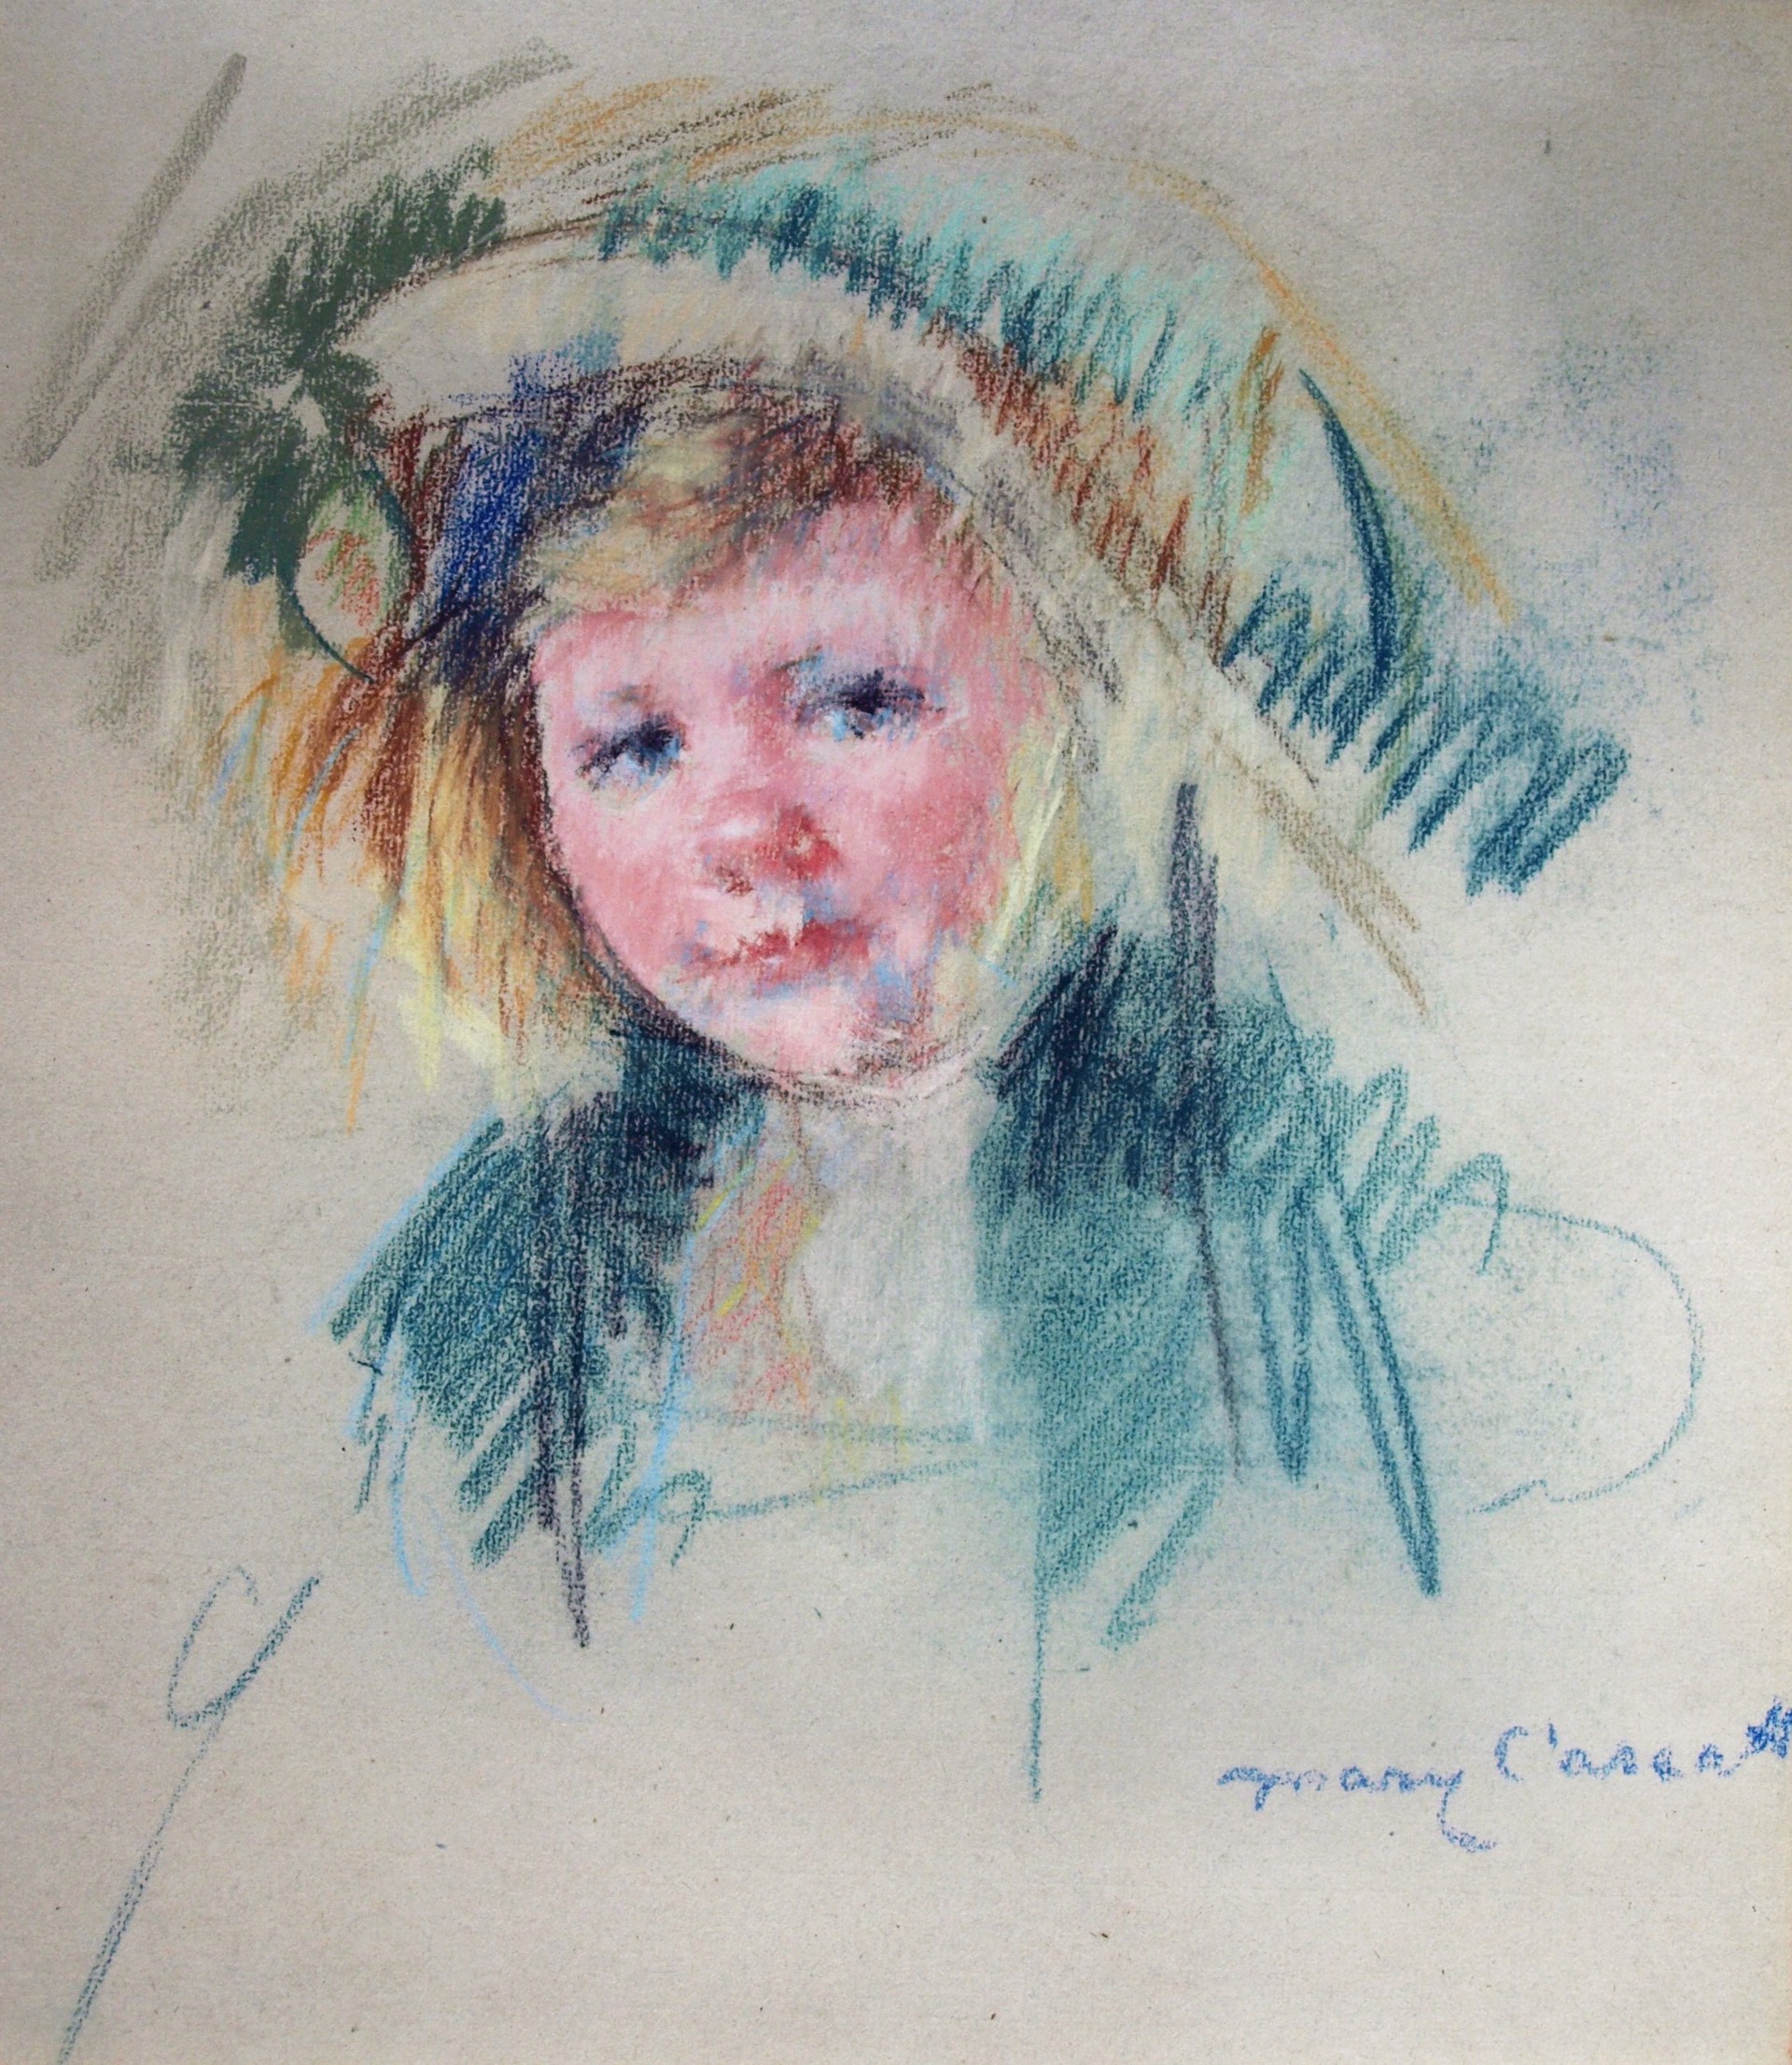 Sara in a Bonnet With a Plum Hanging Down by Mary Cassatt